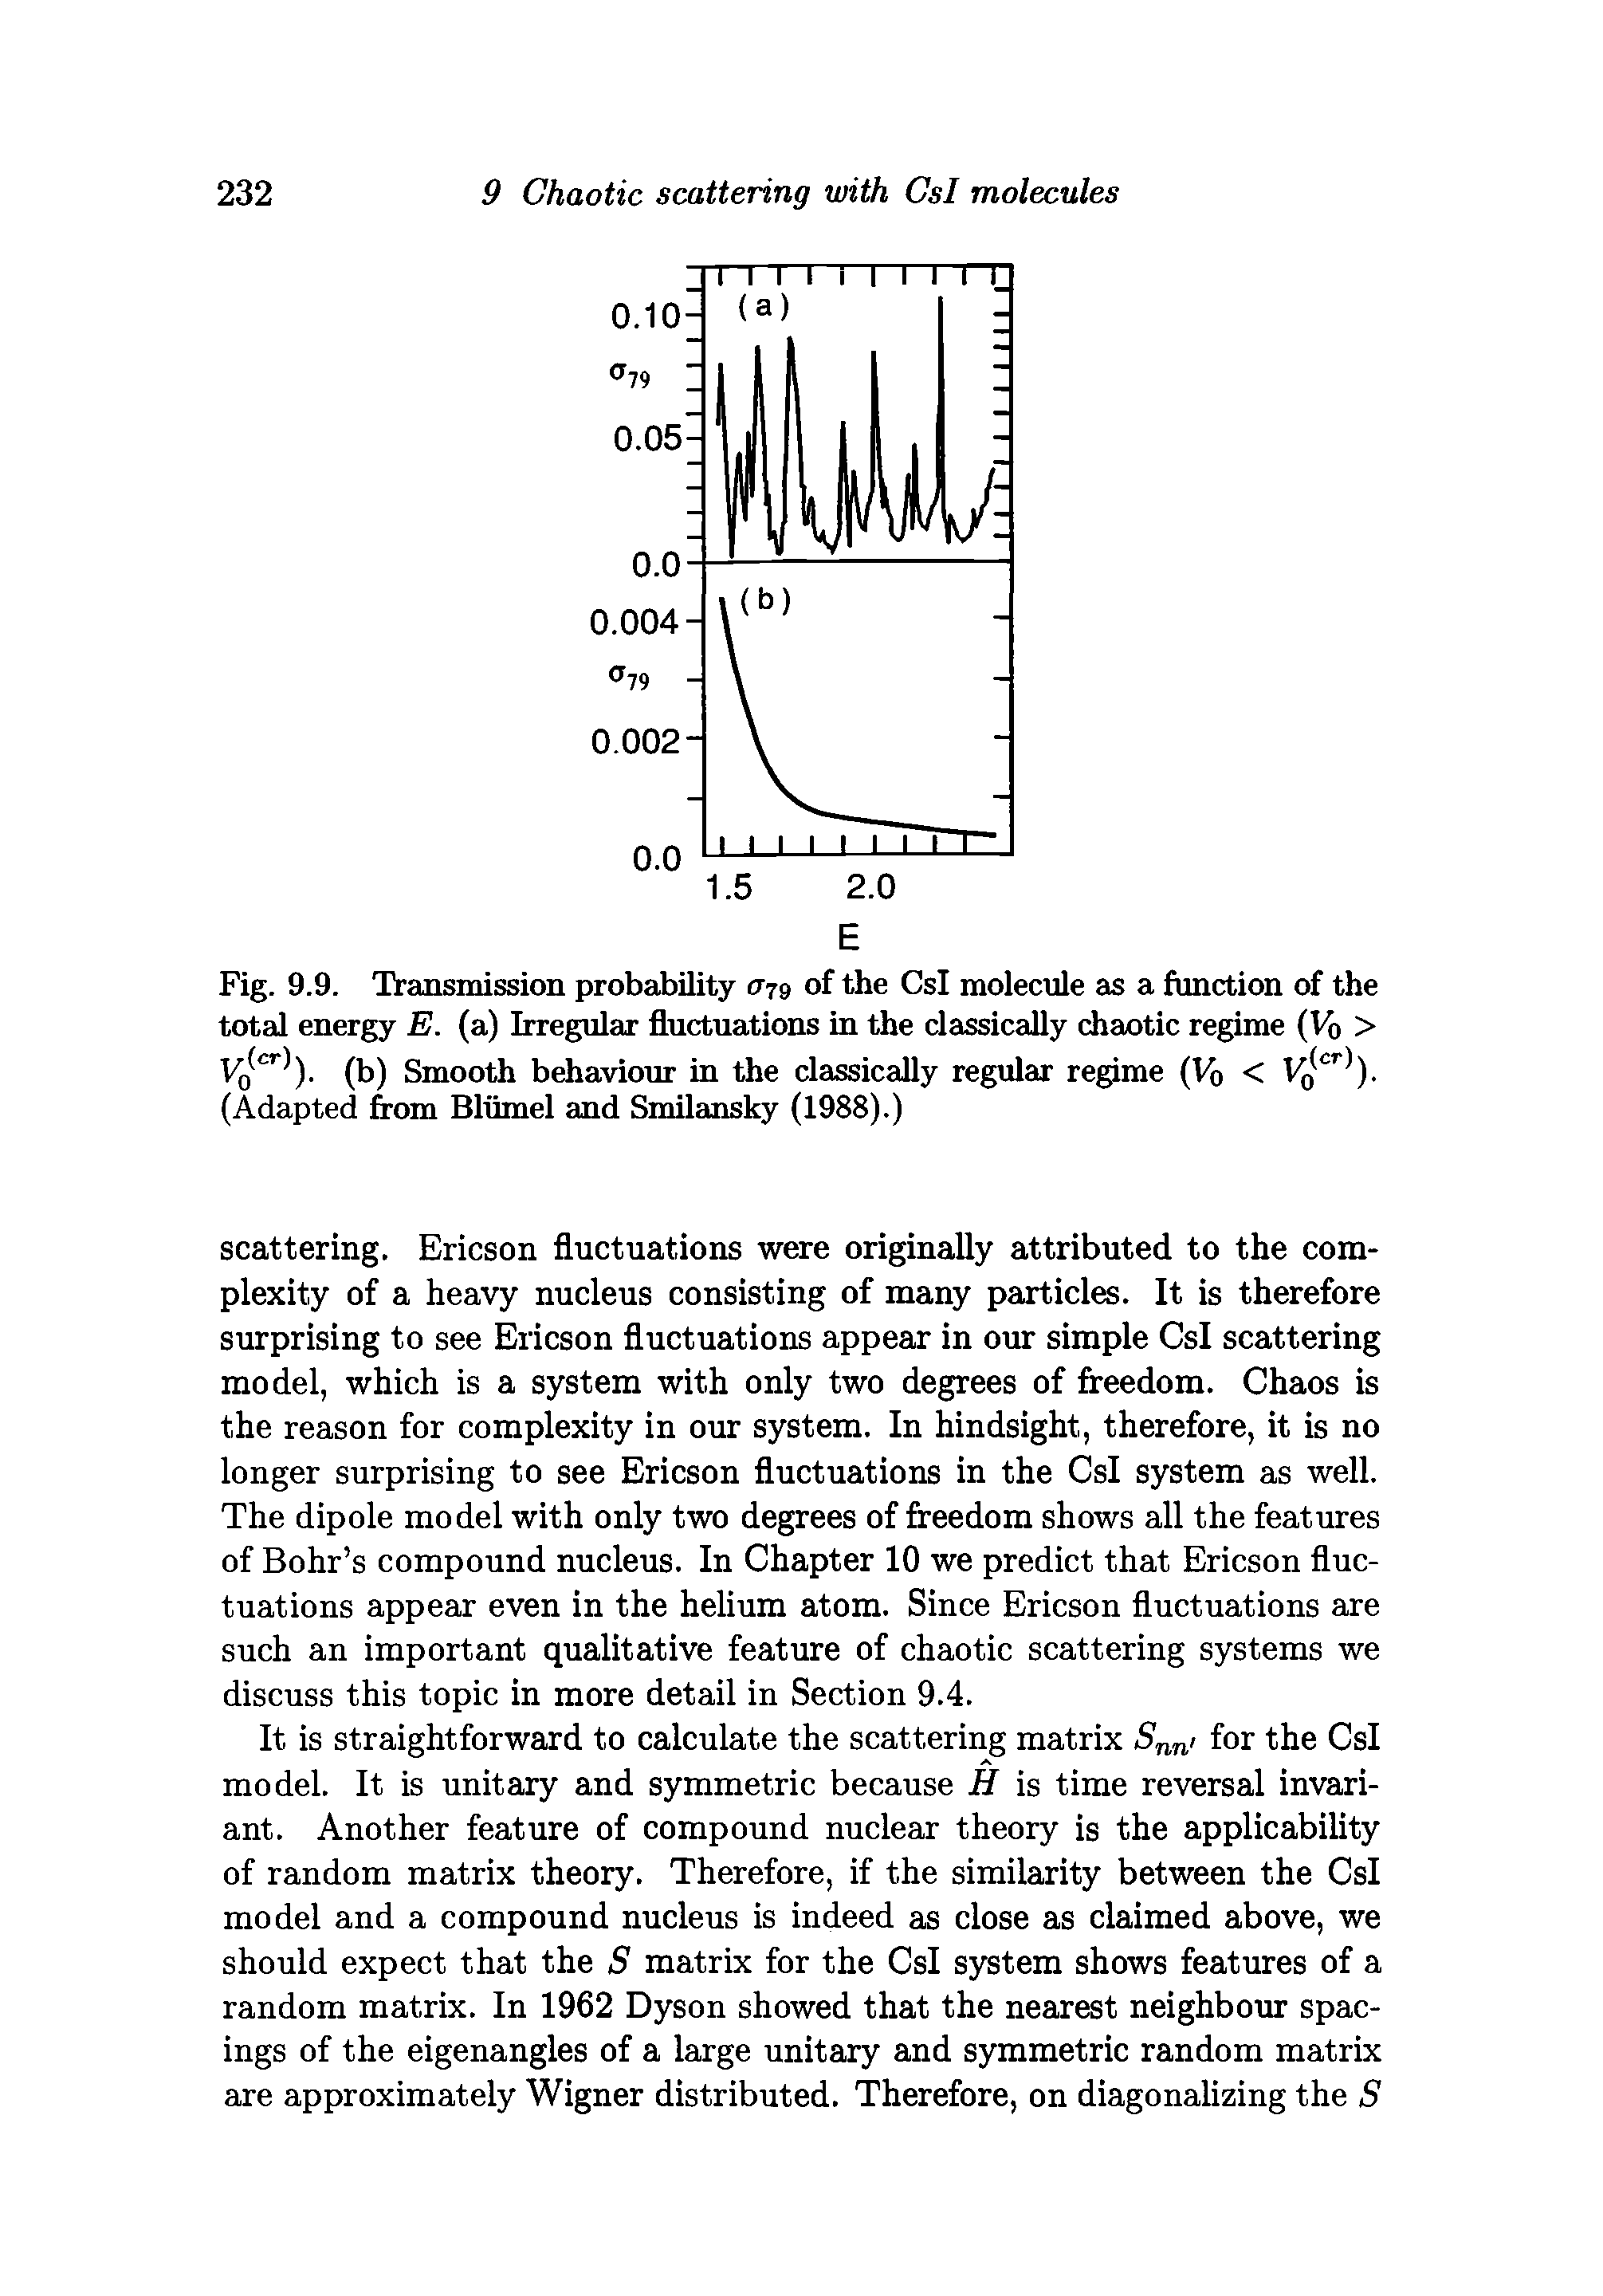 Fig. 9.9. Transmission probability (T79 of the Csl molecule as a function of the total energy E. (a) Irregular fluctuations in the classically chaotic regime (Vb > (b) Smooth behaviour in the classically regular regime (Vb (Adapted from Bliimel and Smilansky (1988).)...